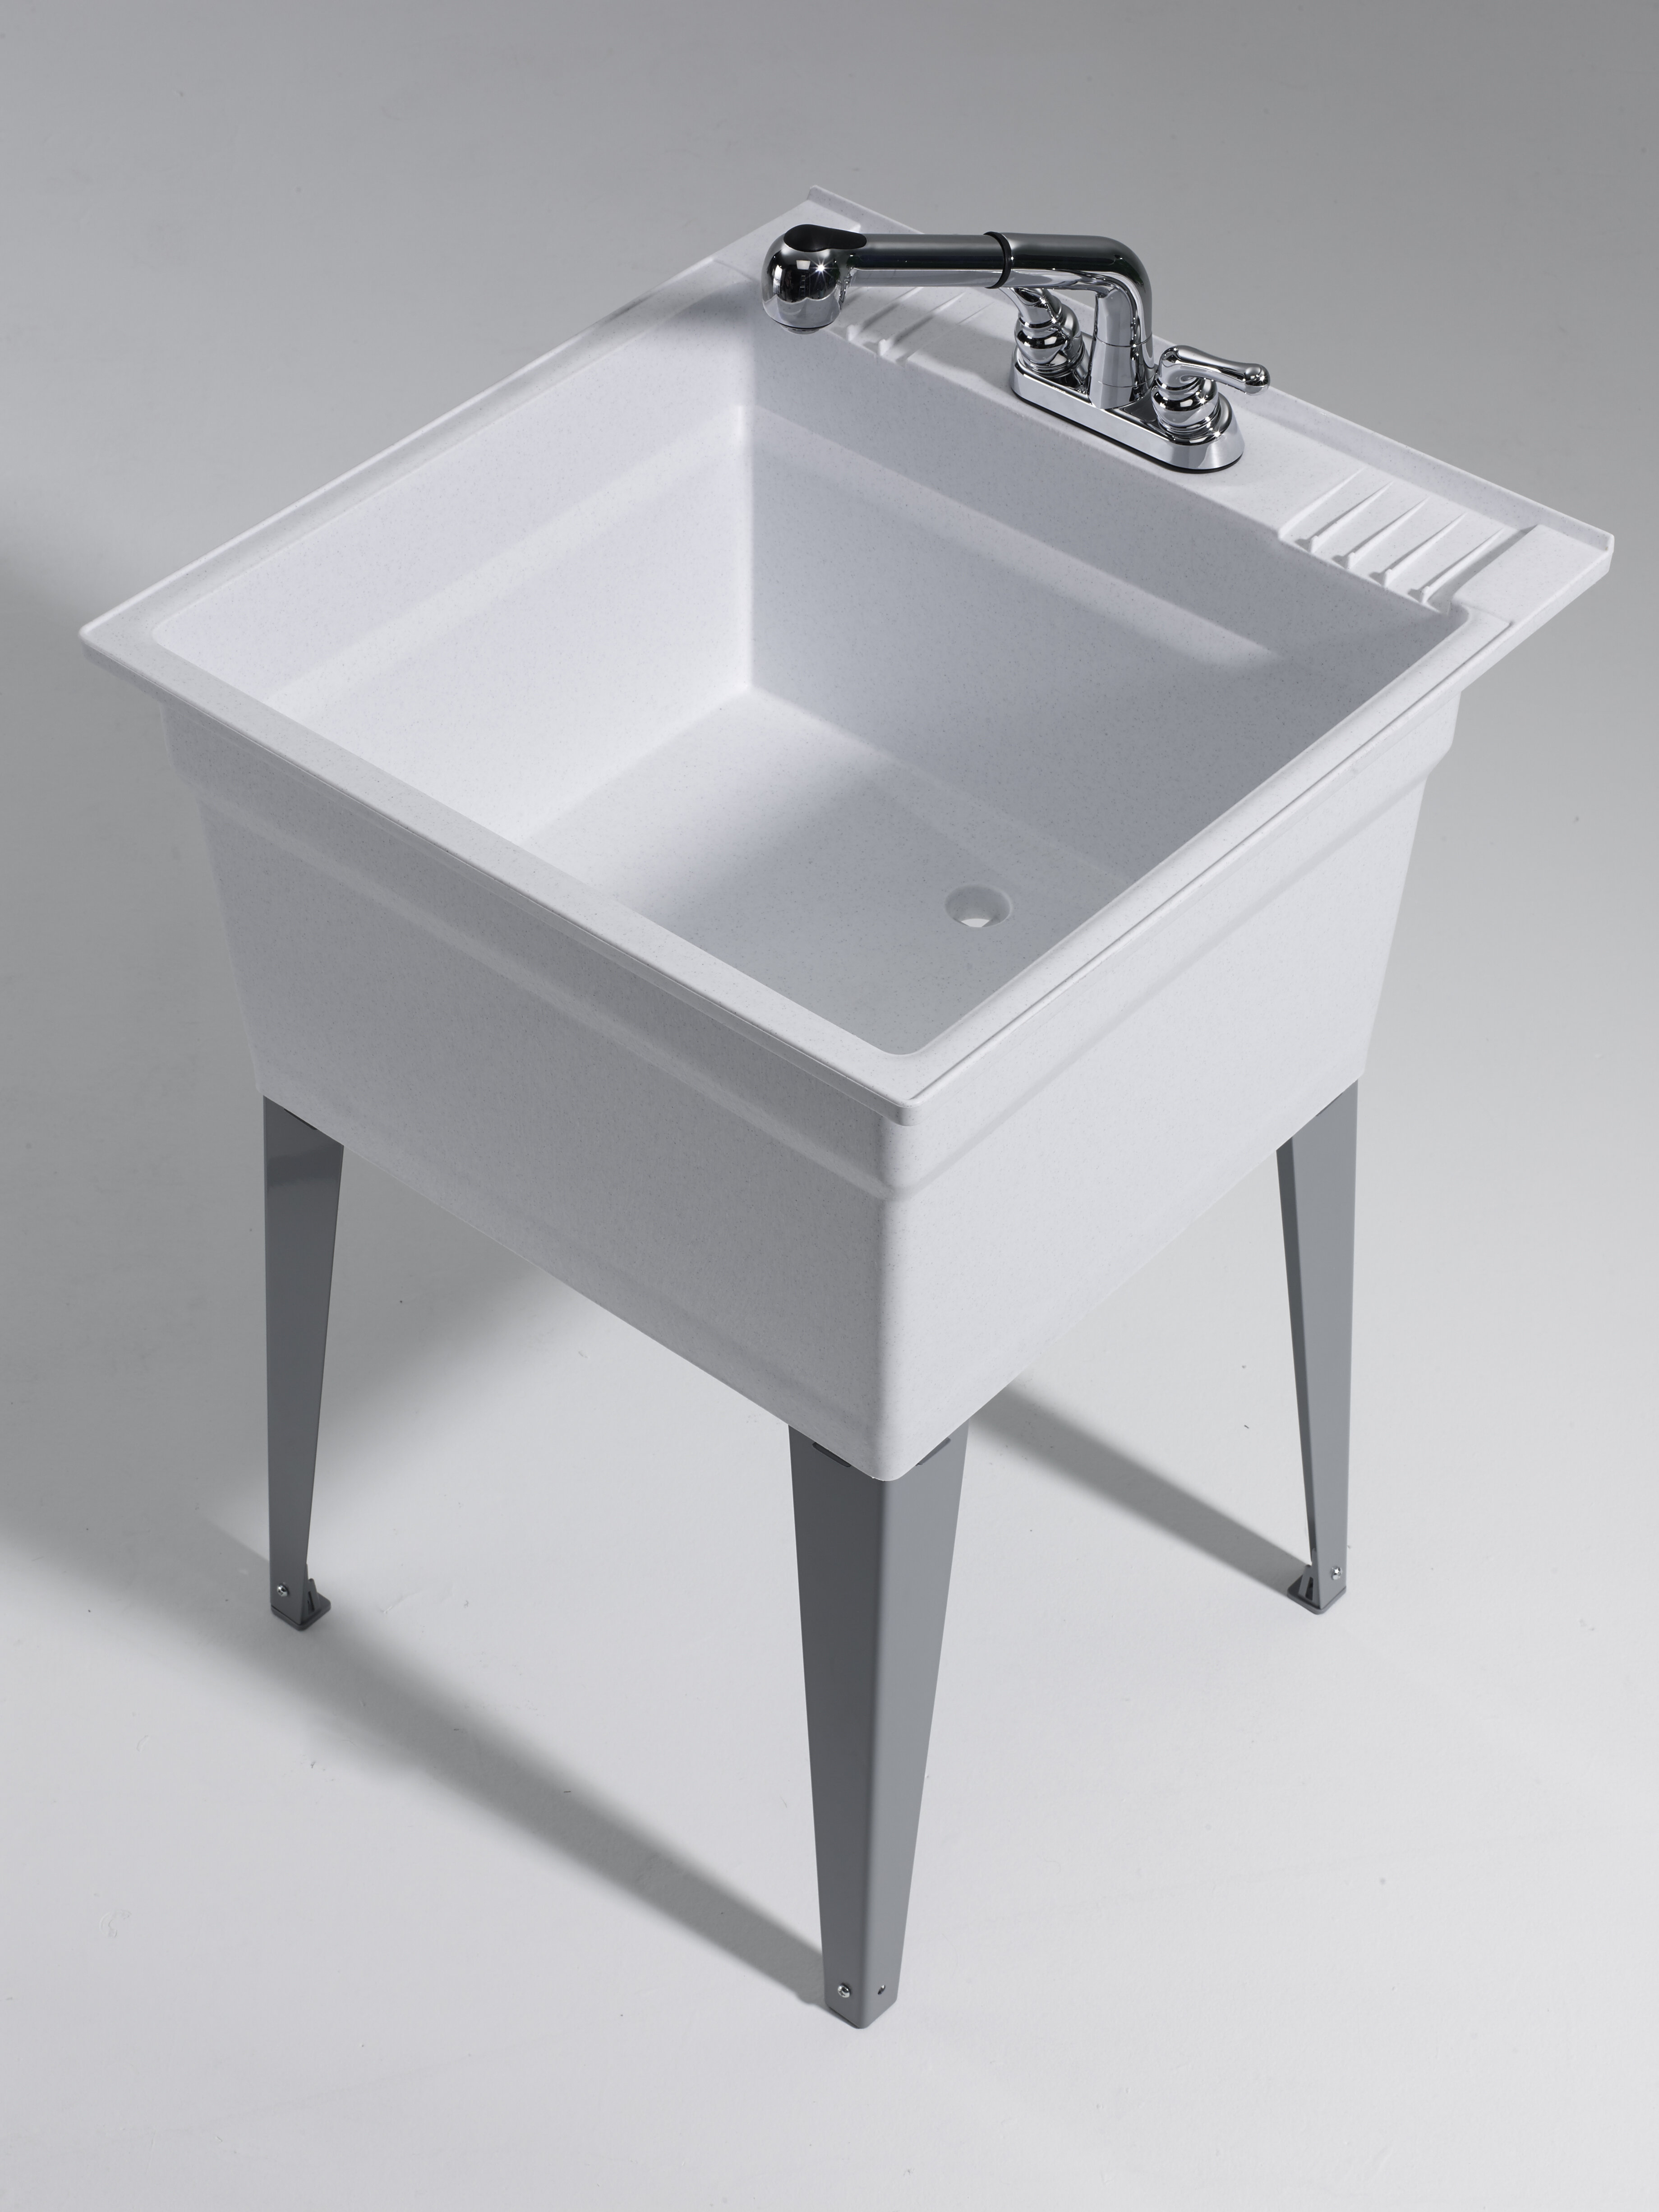 Heavy Duty 23 75 X 25 25 Freestanding Laundry Sink With Faucet